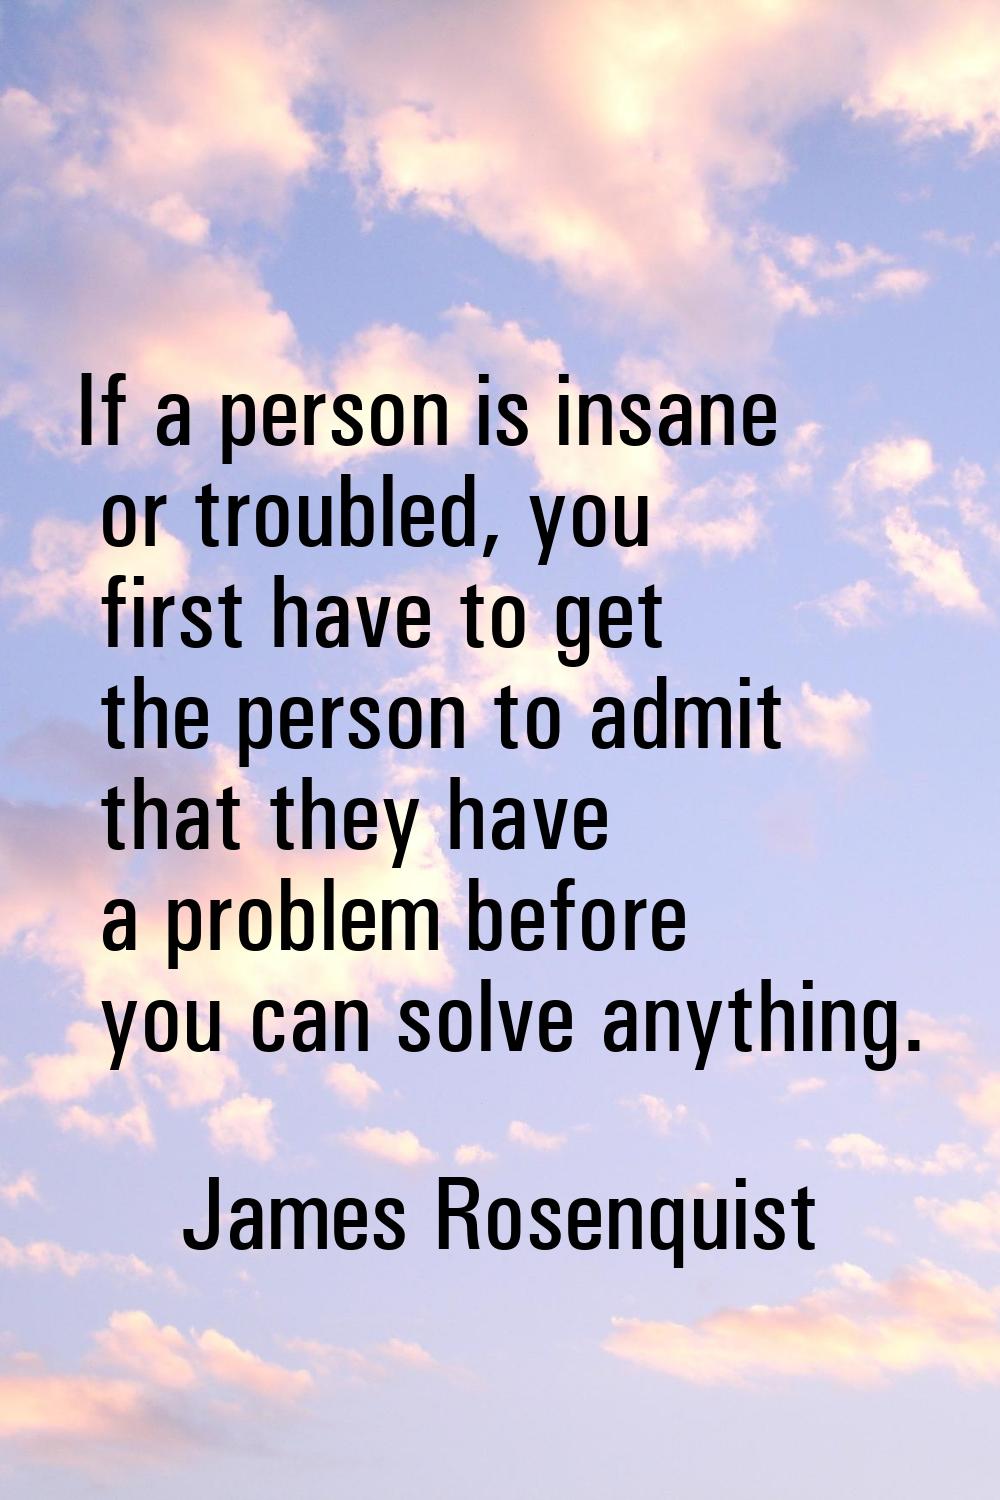 If a person is insane or troubled, you first have to get the person to admit that they have a probl